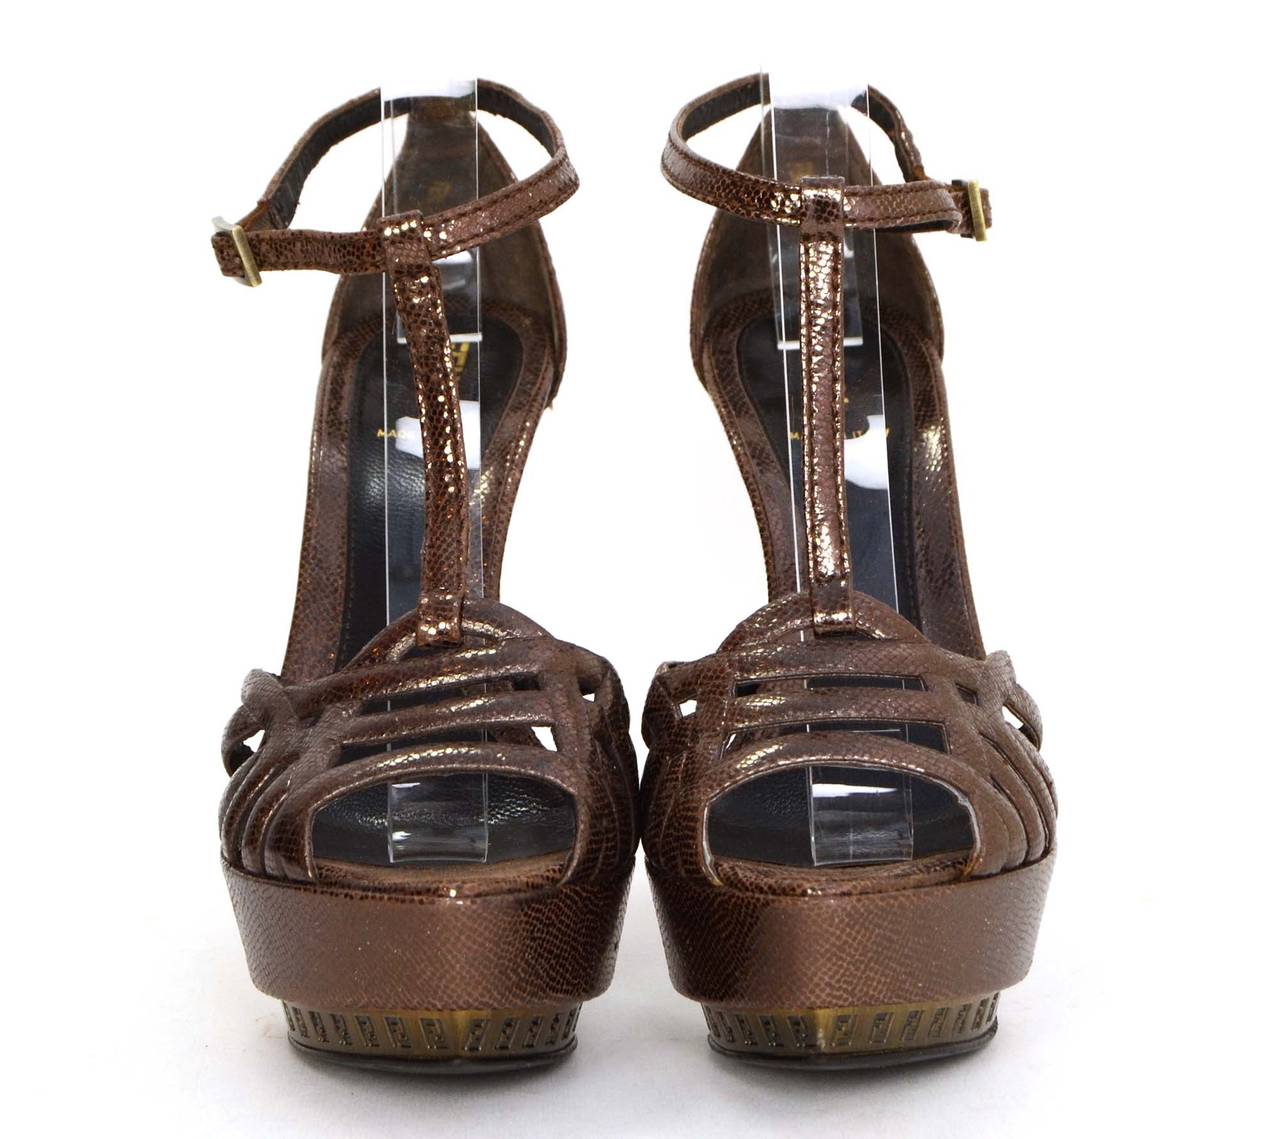 Fendi Bronze Strappy Platform Pumps
Features logo throughout platform
Made in: Italy
Color: Bronze
Composition: Metallic textile
Sole Stamp: Fendi Made in Italy Vero Cuoio 37 1/2
Closure/opening: Ankle buckle
Overall Condition: Excellent with